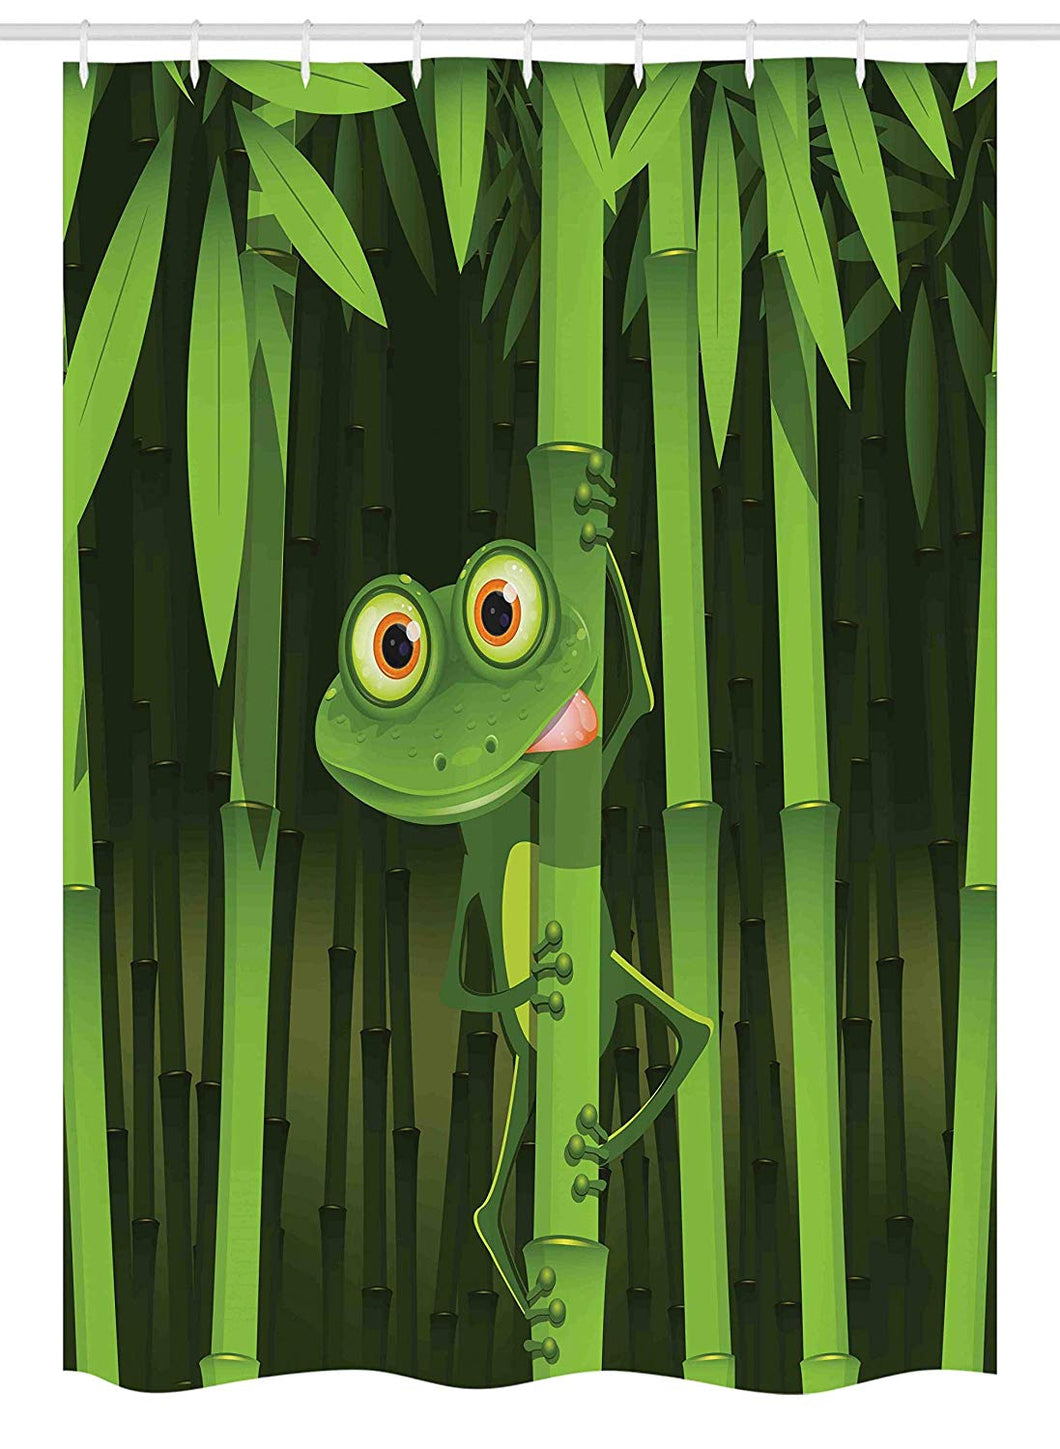 Ambesonne Animal Stall Shower Curtain, Funny Illustration of Friendly Fun Frog on Stem of The Bamboo Jungle Trees Nature, Fabric Bathroom Decor Set with Hooks, 54